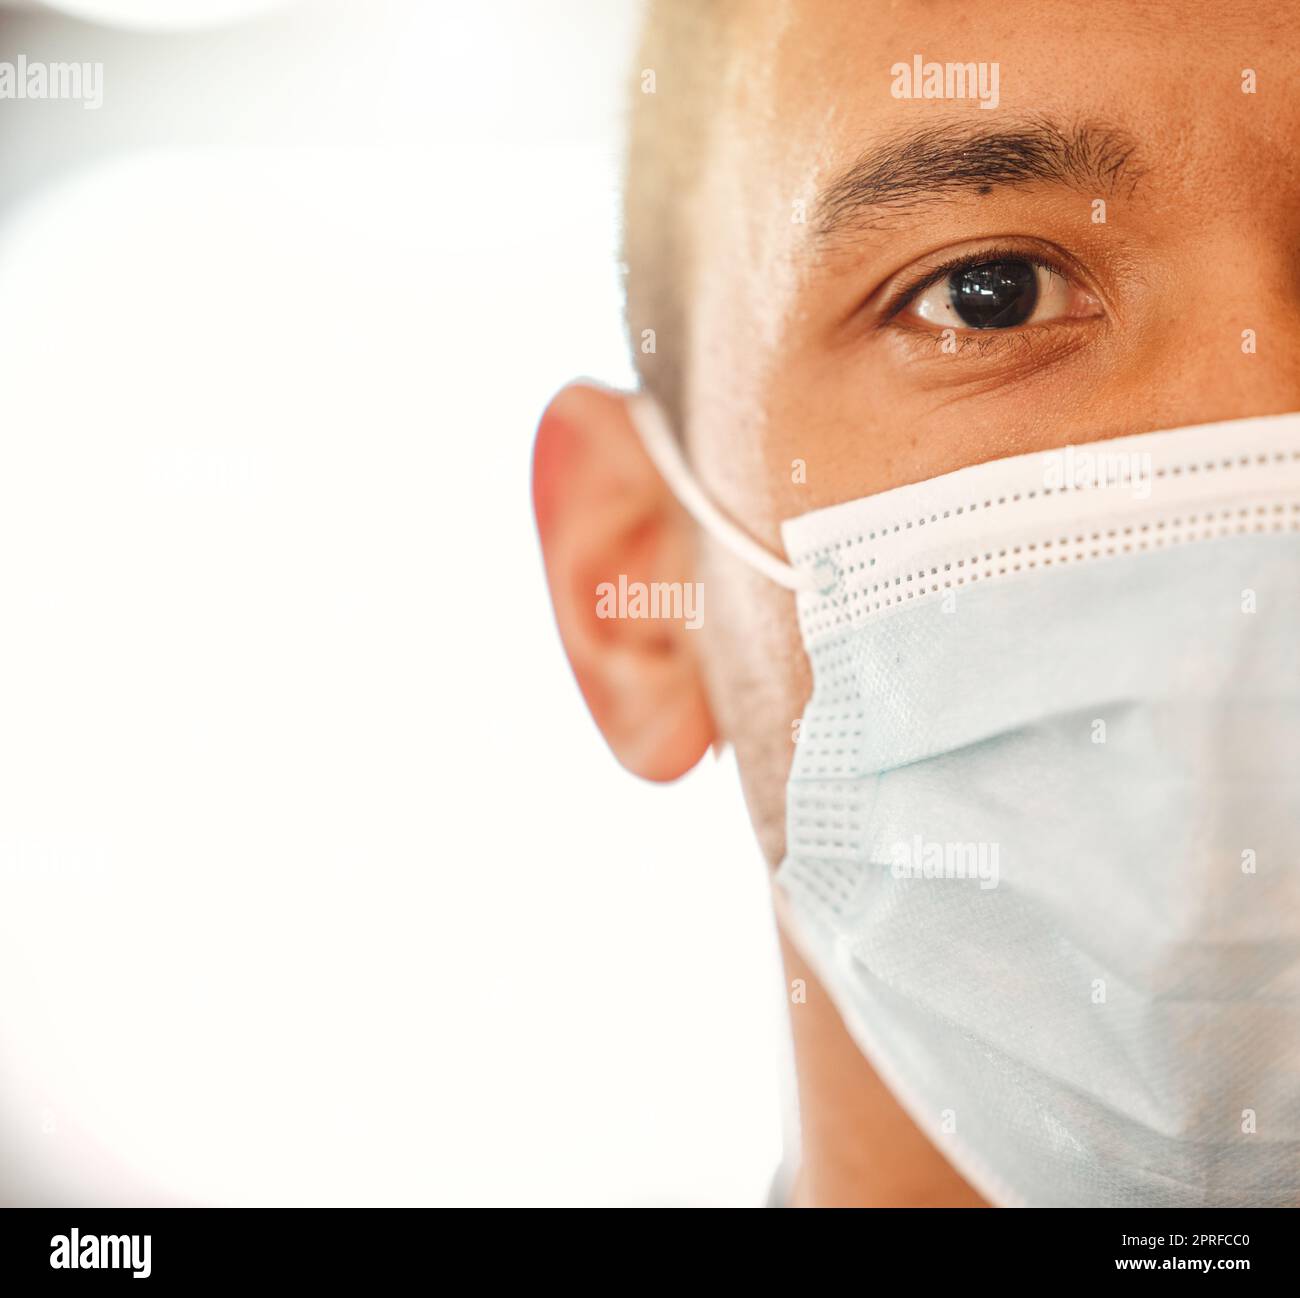 Covid, mask and closeup portrait for healthcare copy space background. Doctor, nurse or person wearing face protection of their health. Hospital safety for people at risk of infection medical advert. Stock Photo